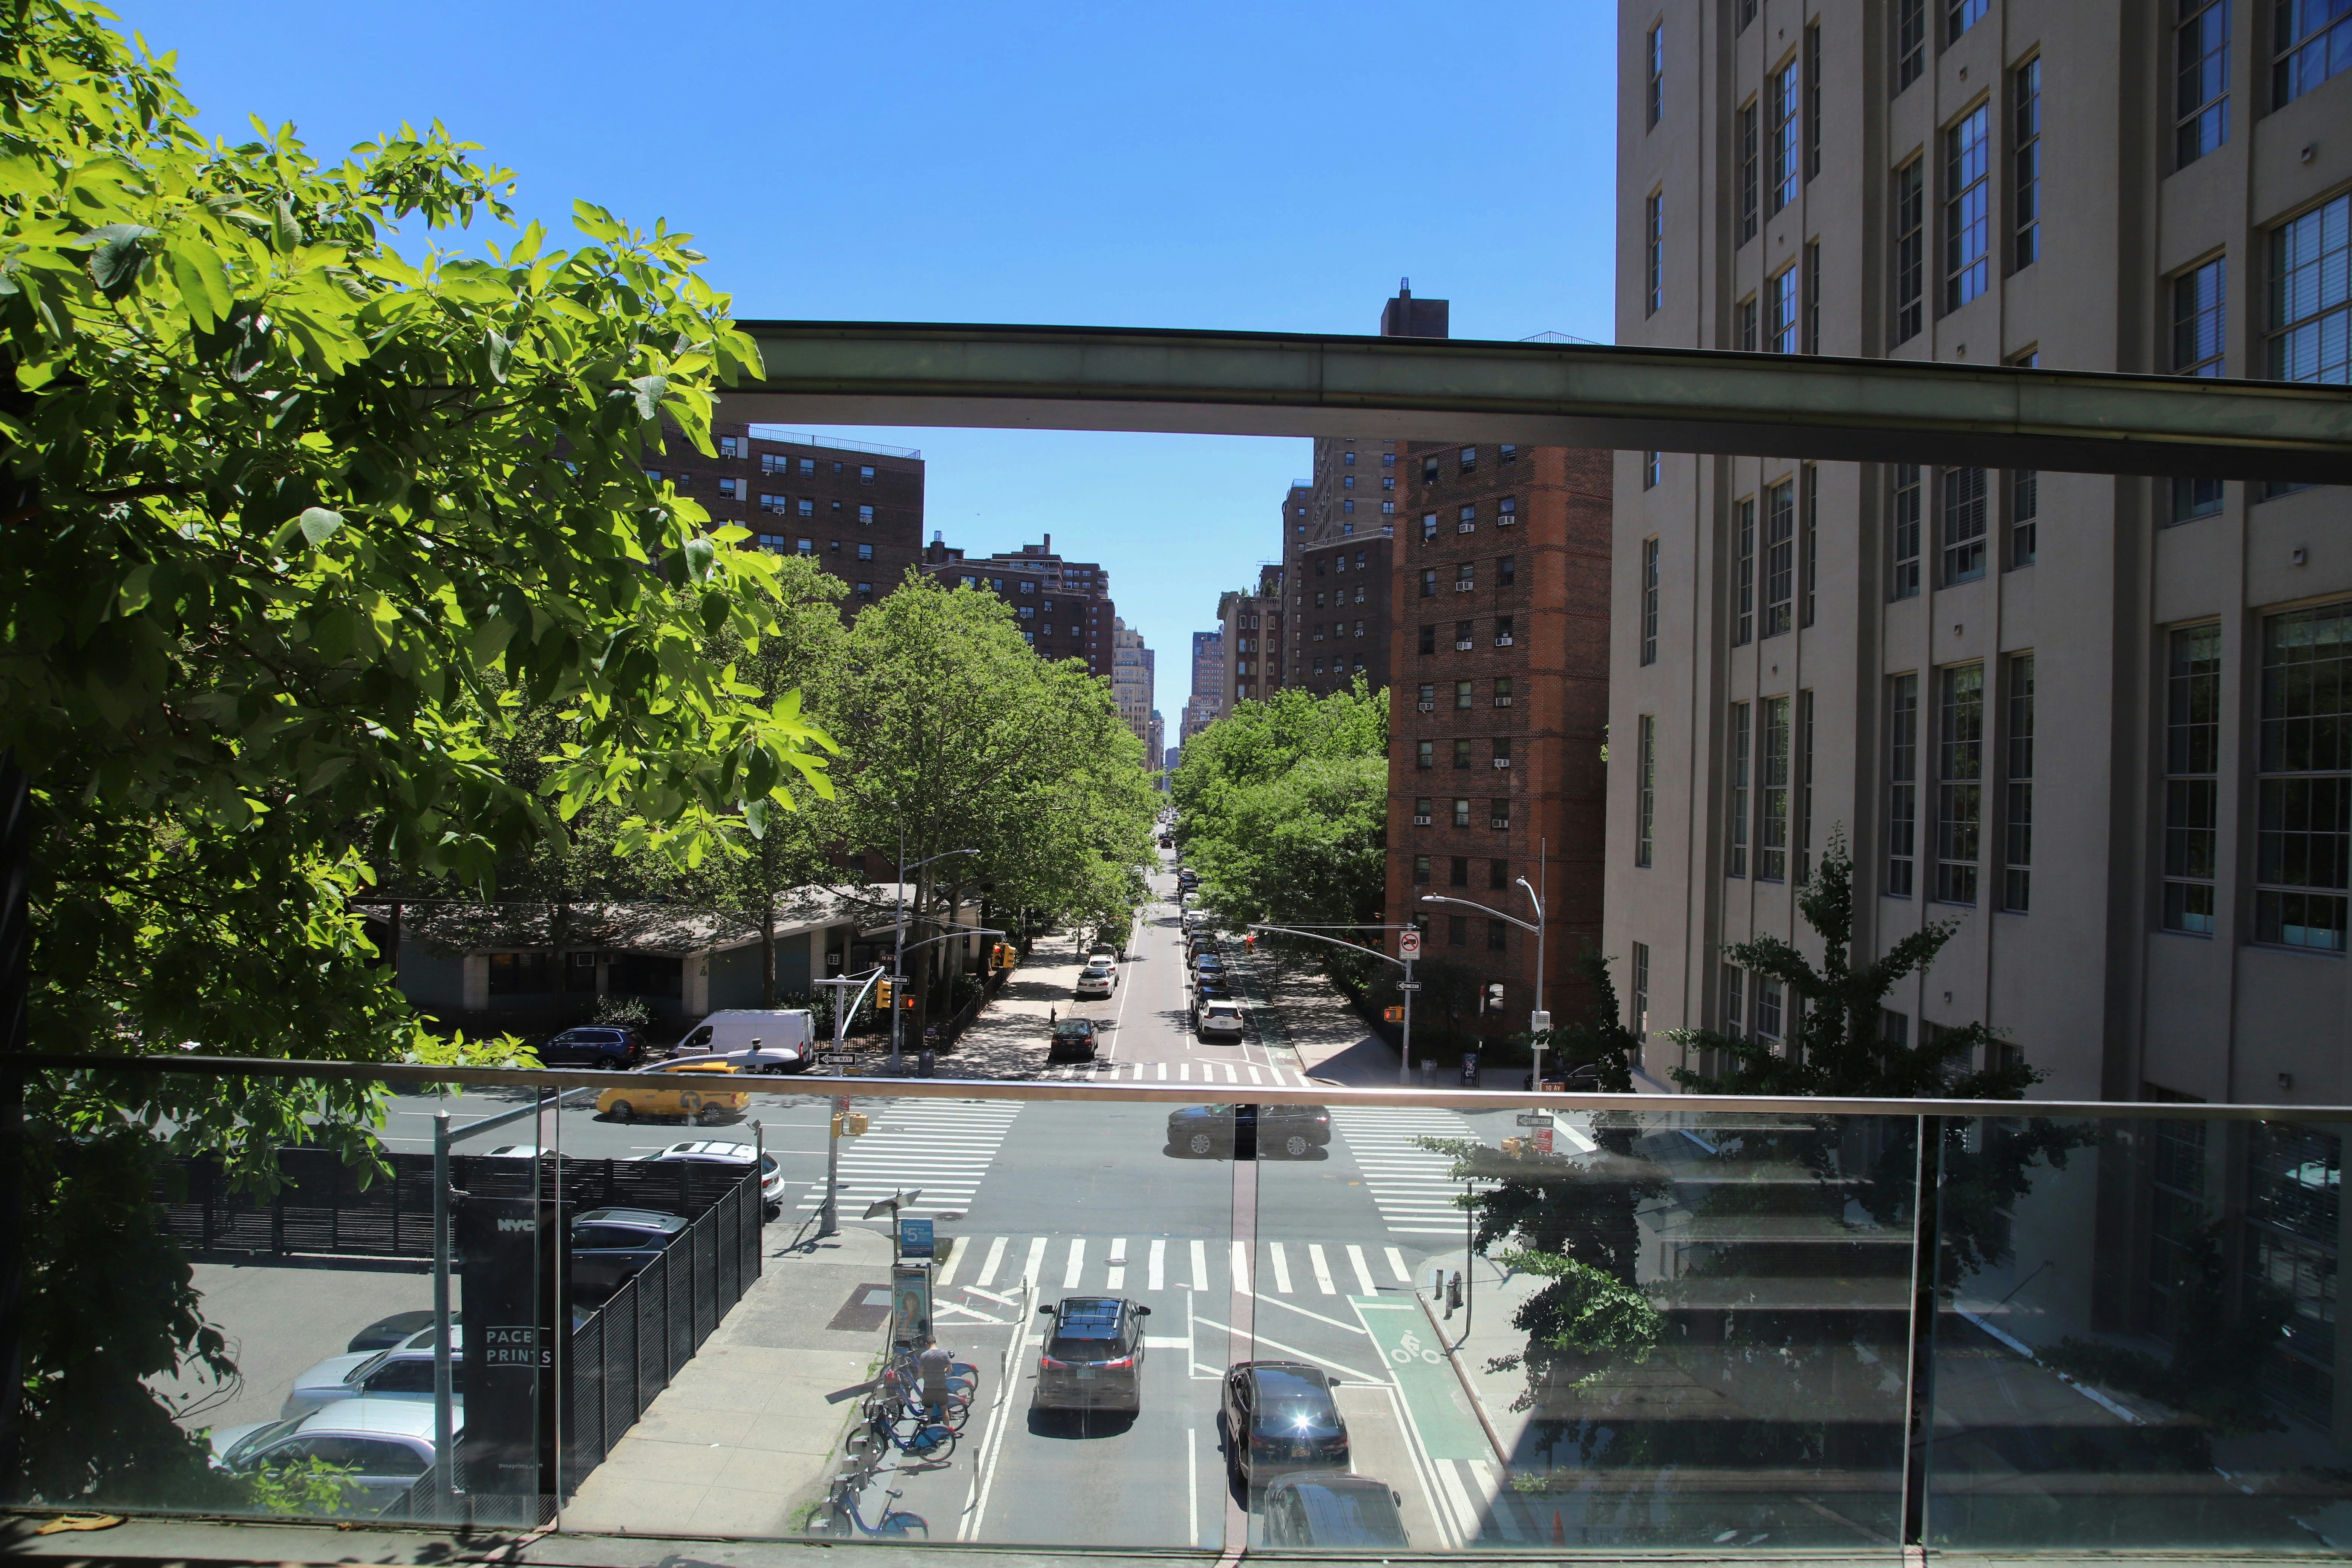 View from the High Line onto a street in Chelsea, New York